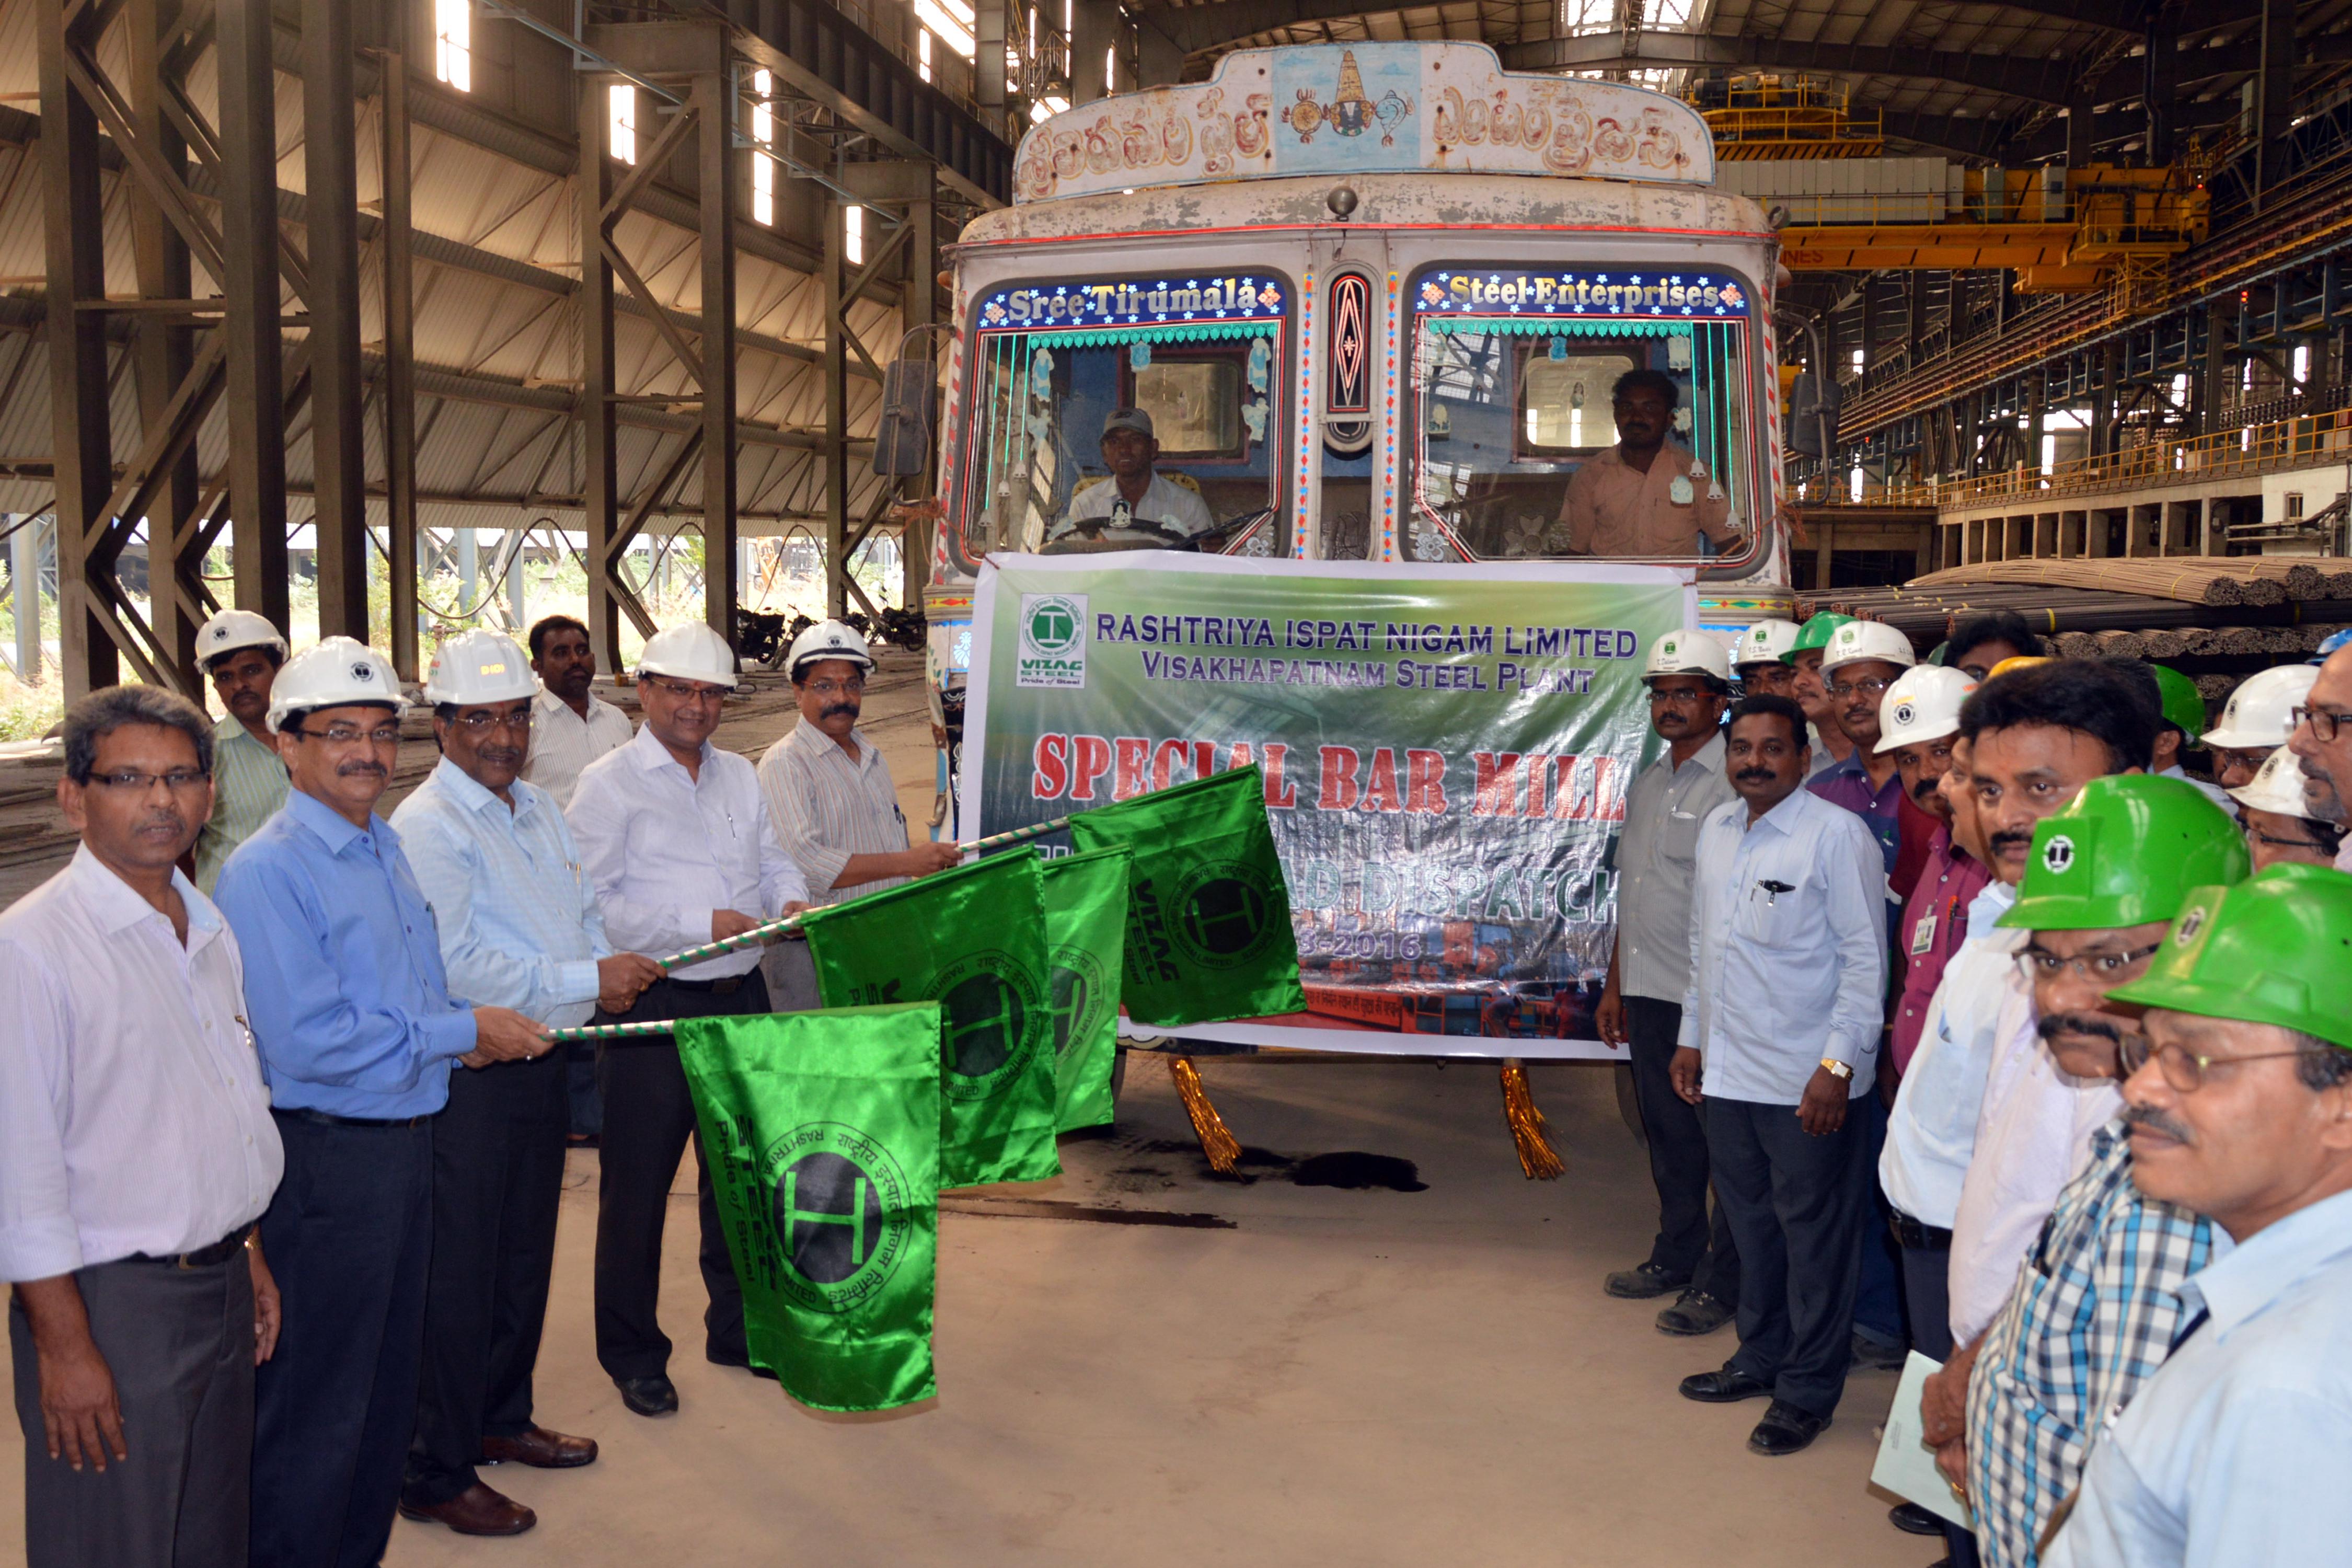 Special Bar Mill Products flagged off in VSP